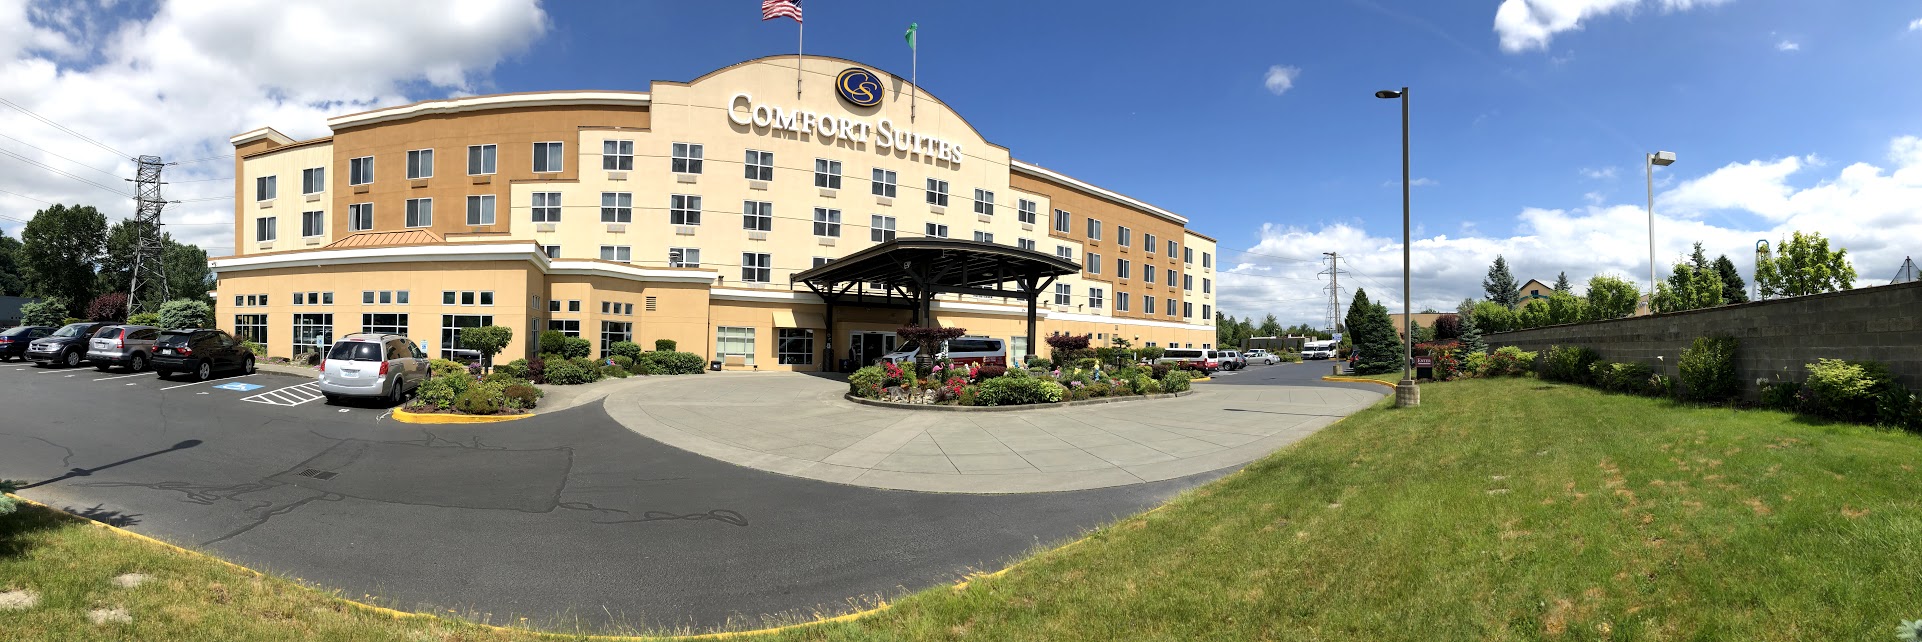 Comfort Suites Airport Stay In Washington Photo 2019